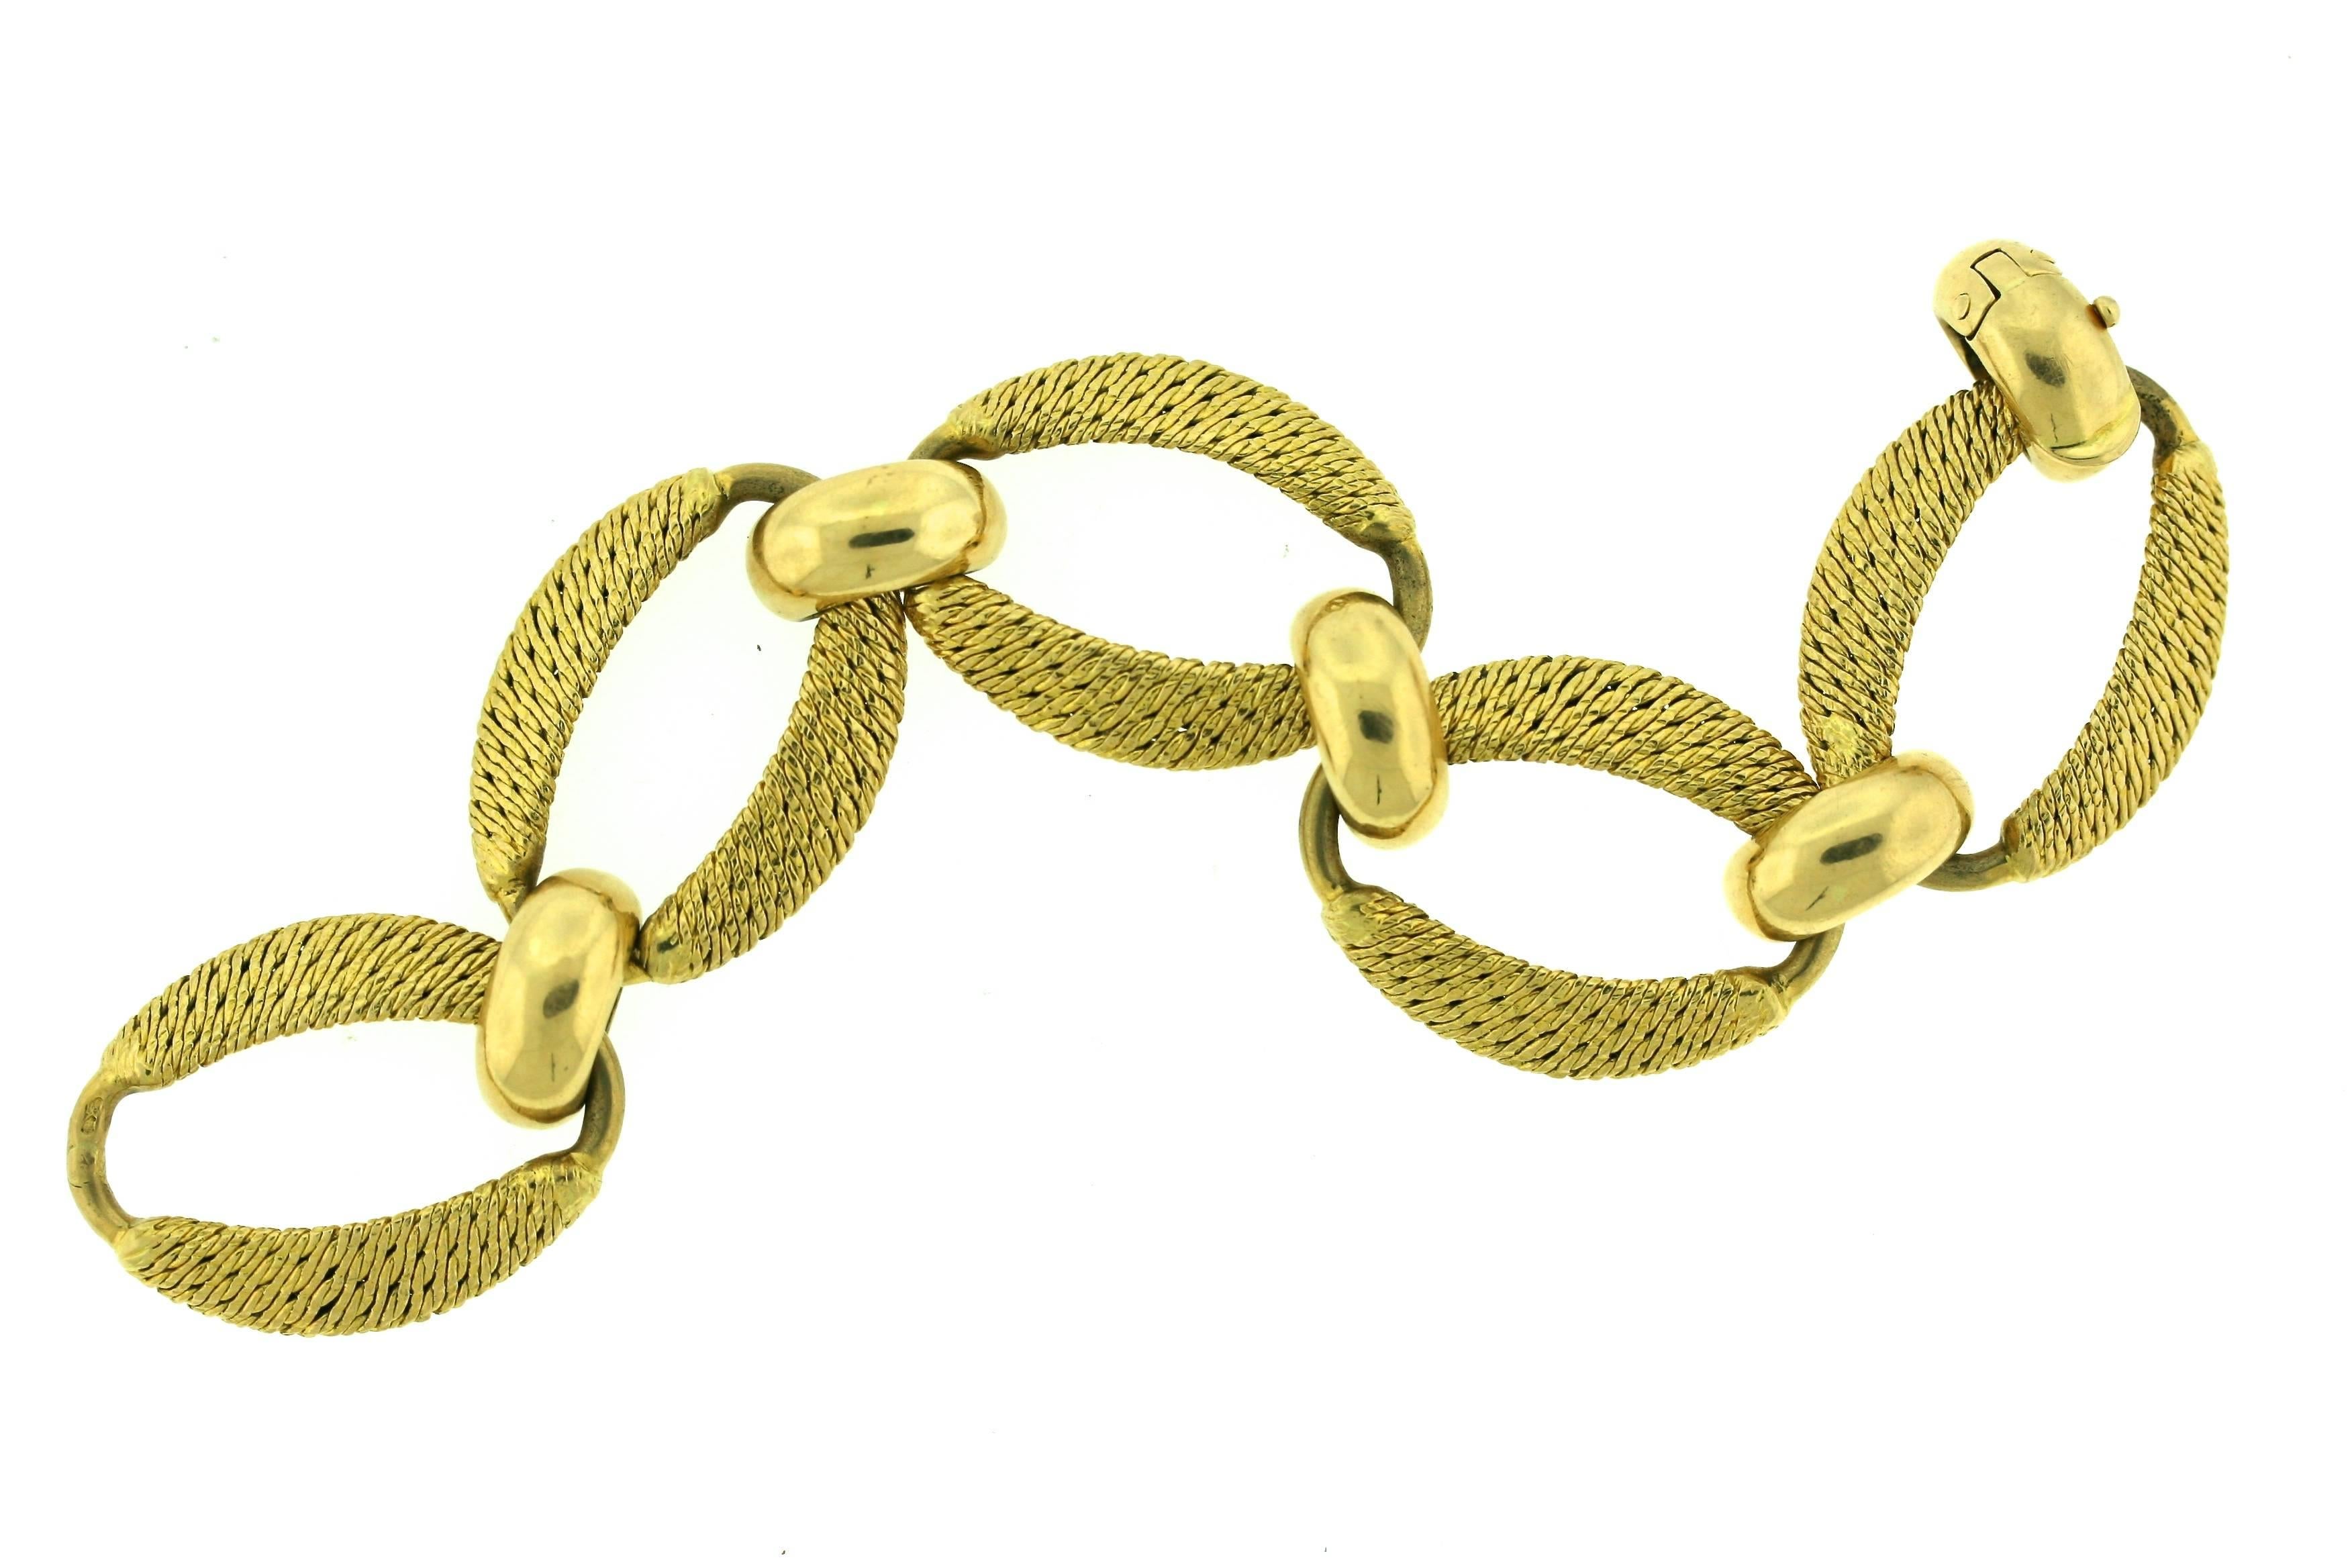 Mellerio dits Meller Woven Gold Link Bracelet In Excellent Condition For Sale In New York, NY